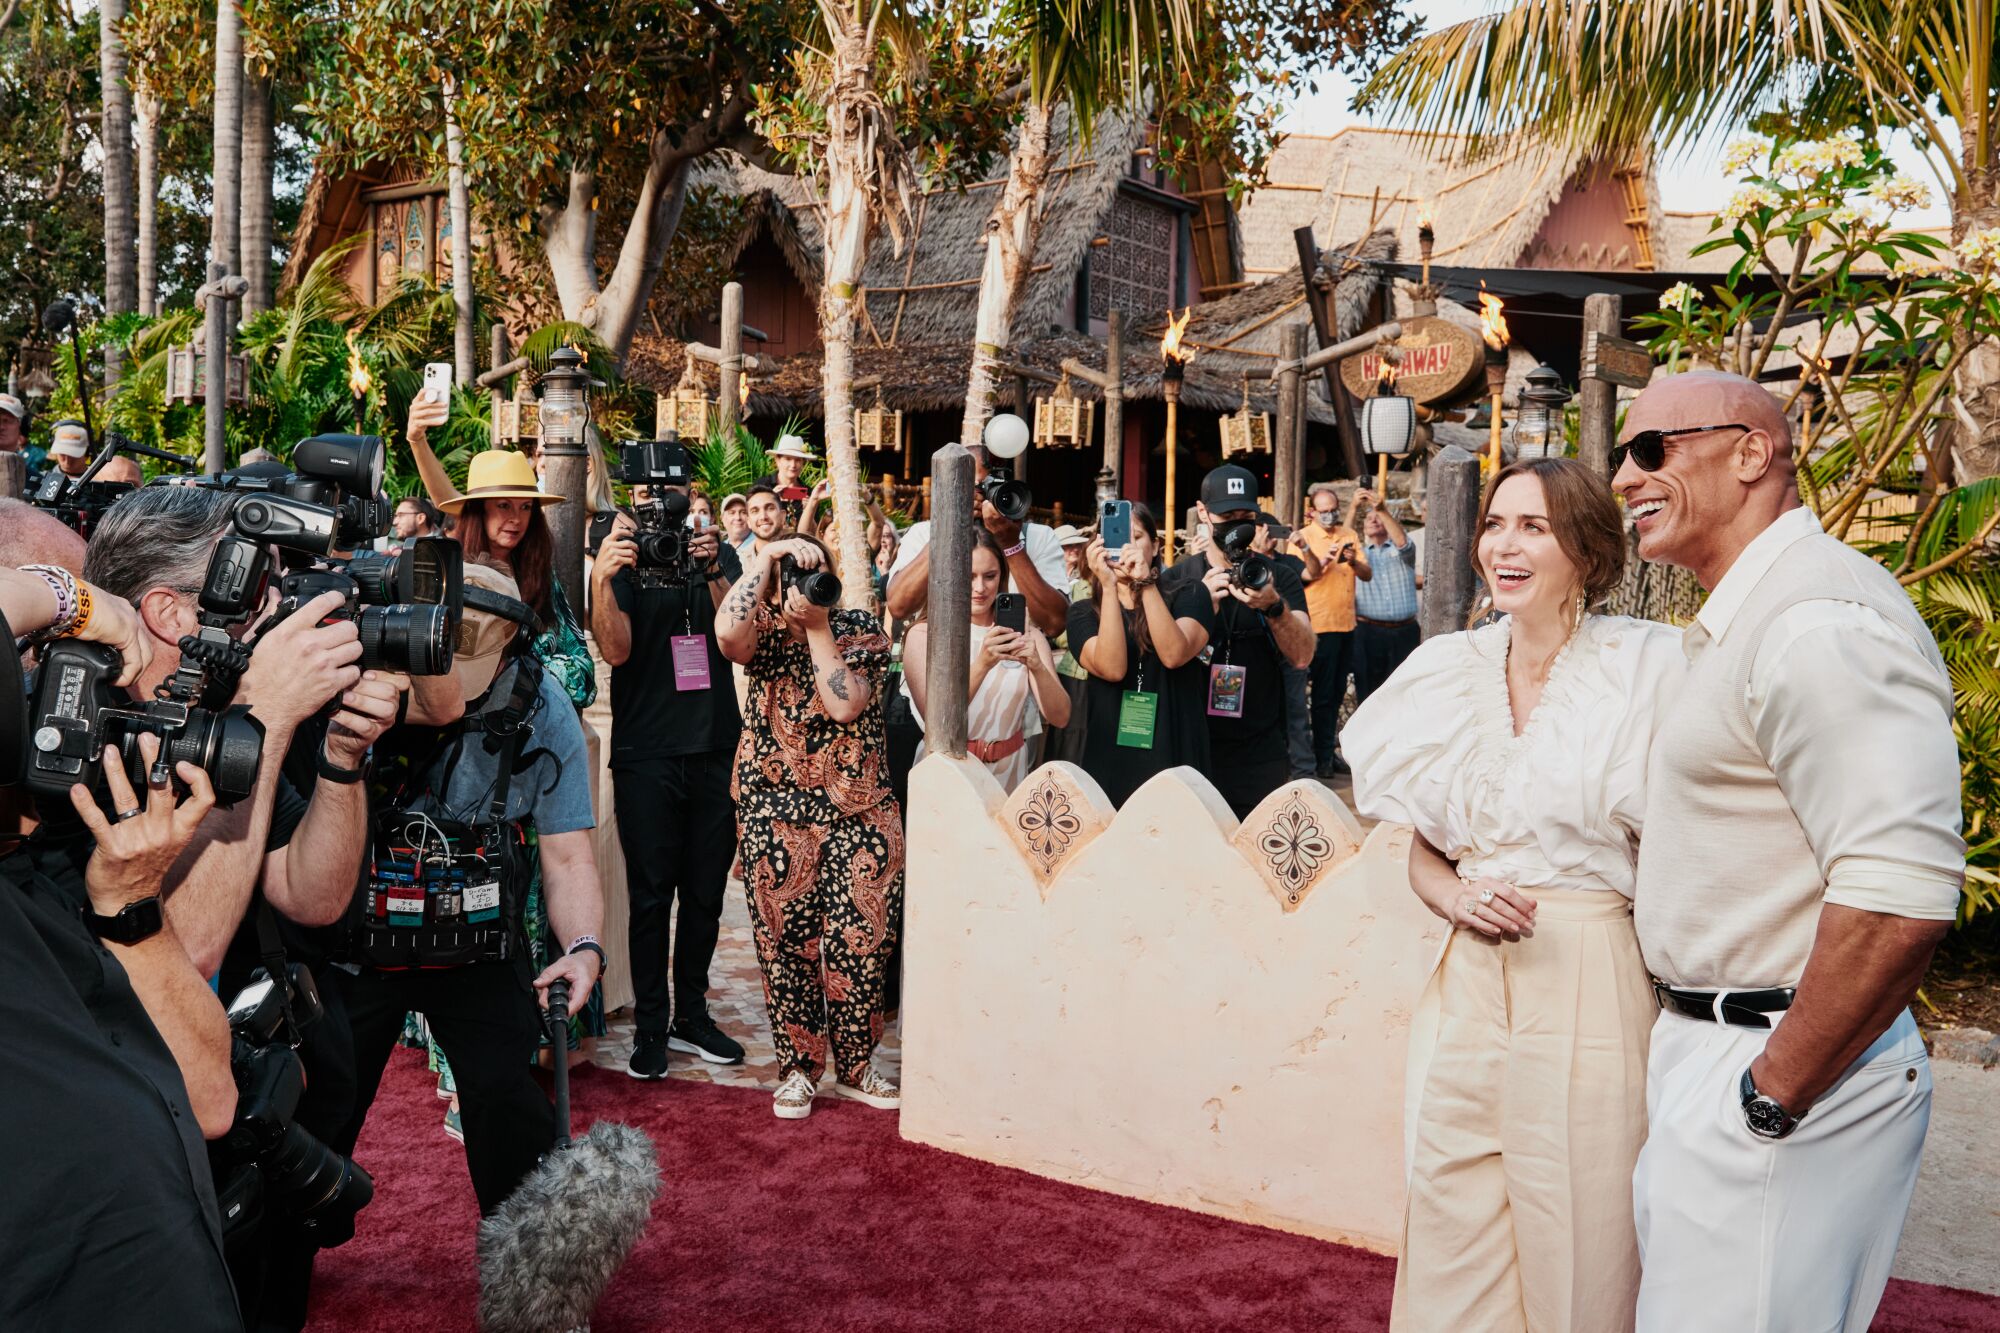 Emily Blunt and Dwayne Johnson exit the Jungle Cruise ride and stand for photographers on the red carpet.